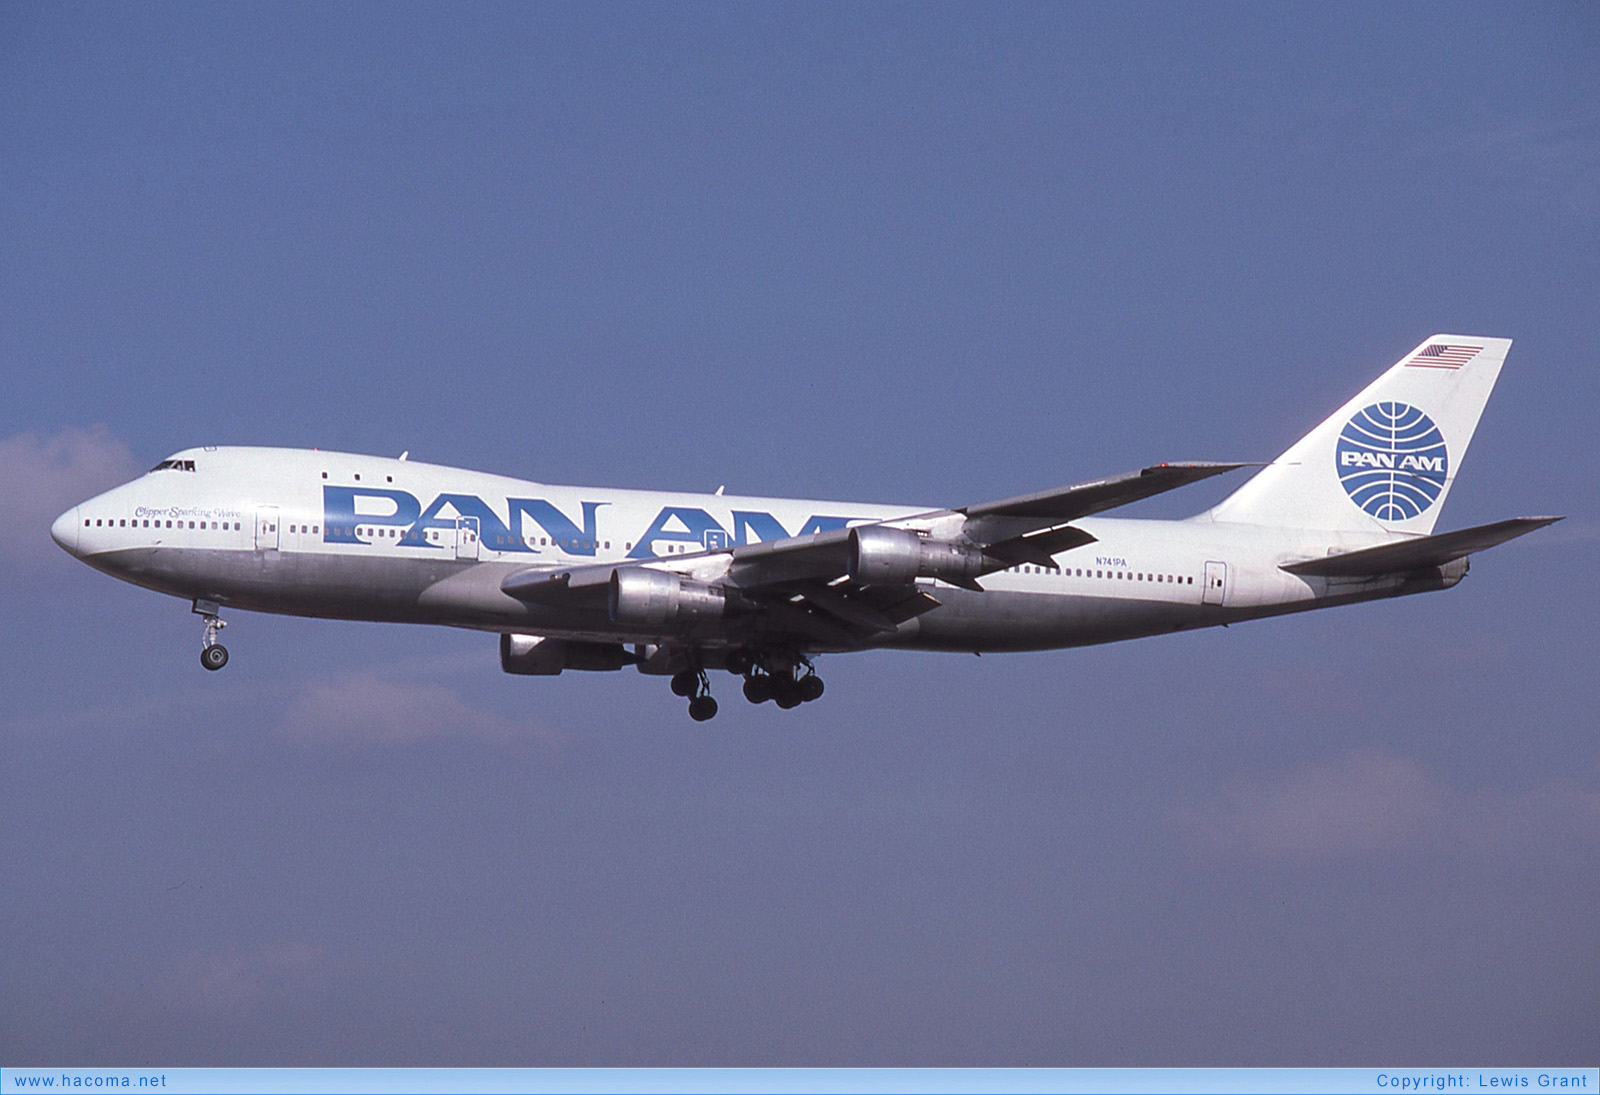 Photo of N741PA - Pan Am Clipper Kit Carson / Sparking Wave / Special Olympian - London Heathrow Airport - Mar 8, 1986